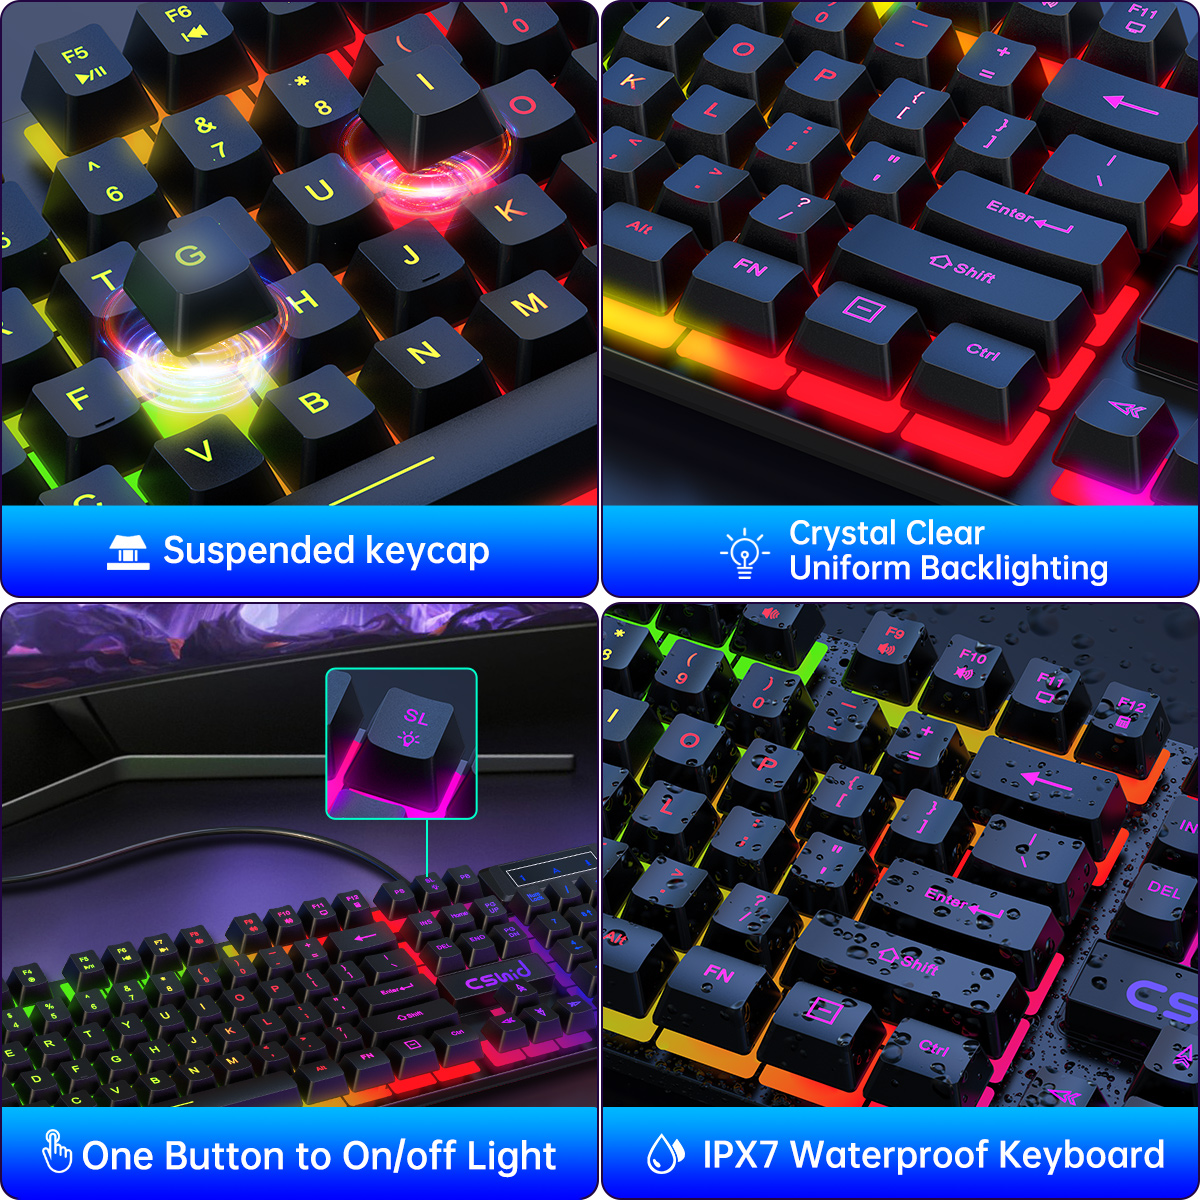 Wired Gaming Keyboard & Mouse Combo, RGB Backlit Mechanical Feel Gaming Keyboard Mouse W/ Multimedia Keys, Anti-ghosting Keys, Spill-Resistant Keycaps for Windows PC Gamers Desktop Computer Laptop - image 5 of 7